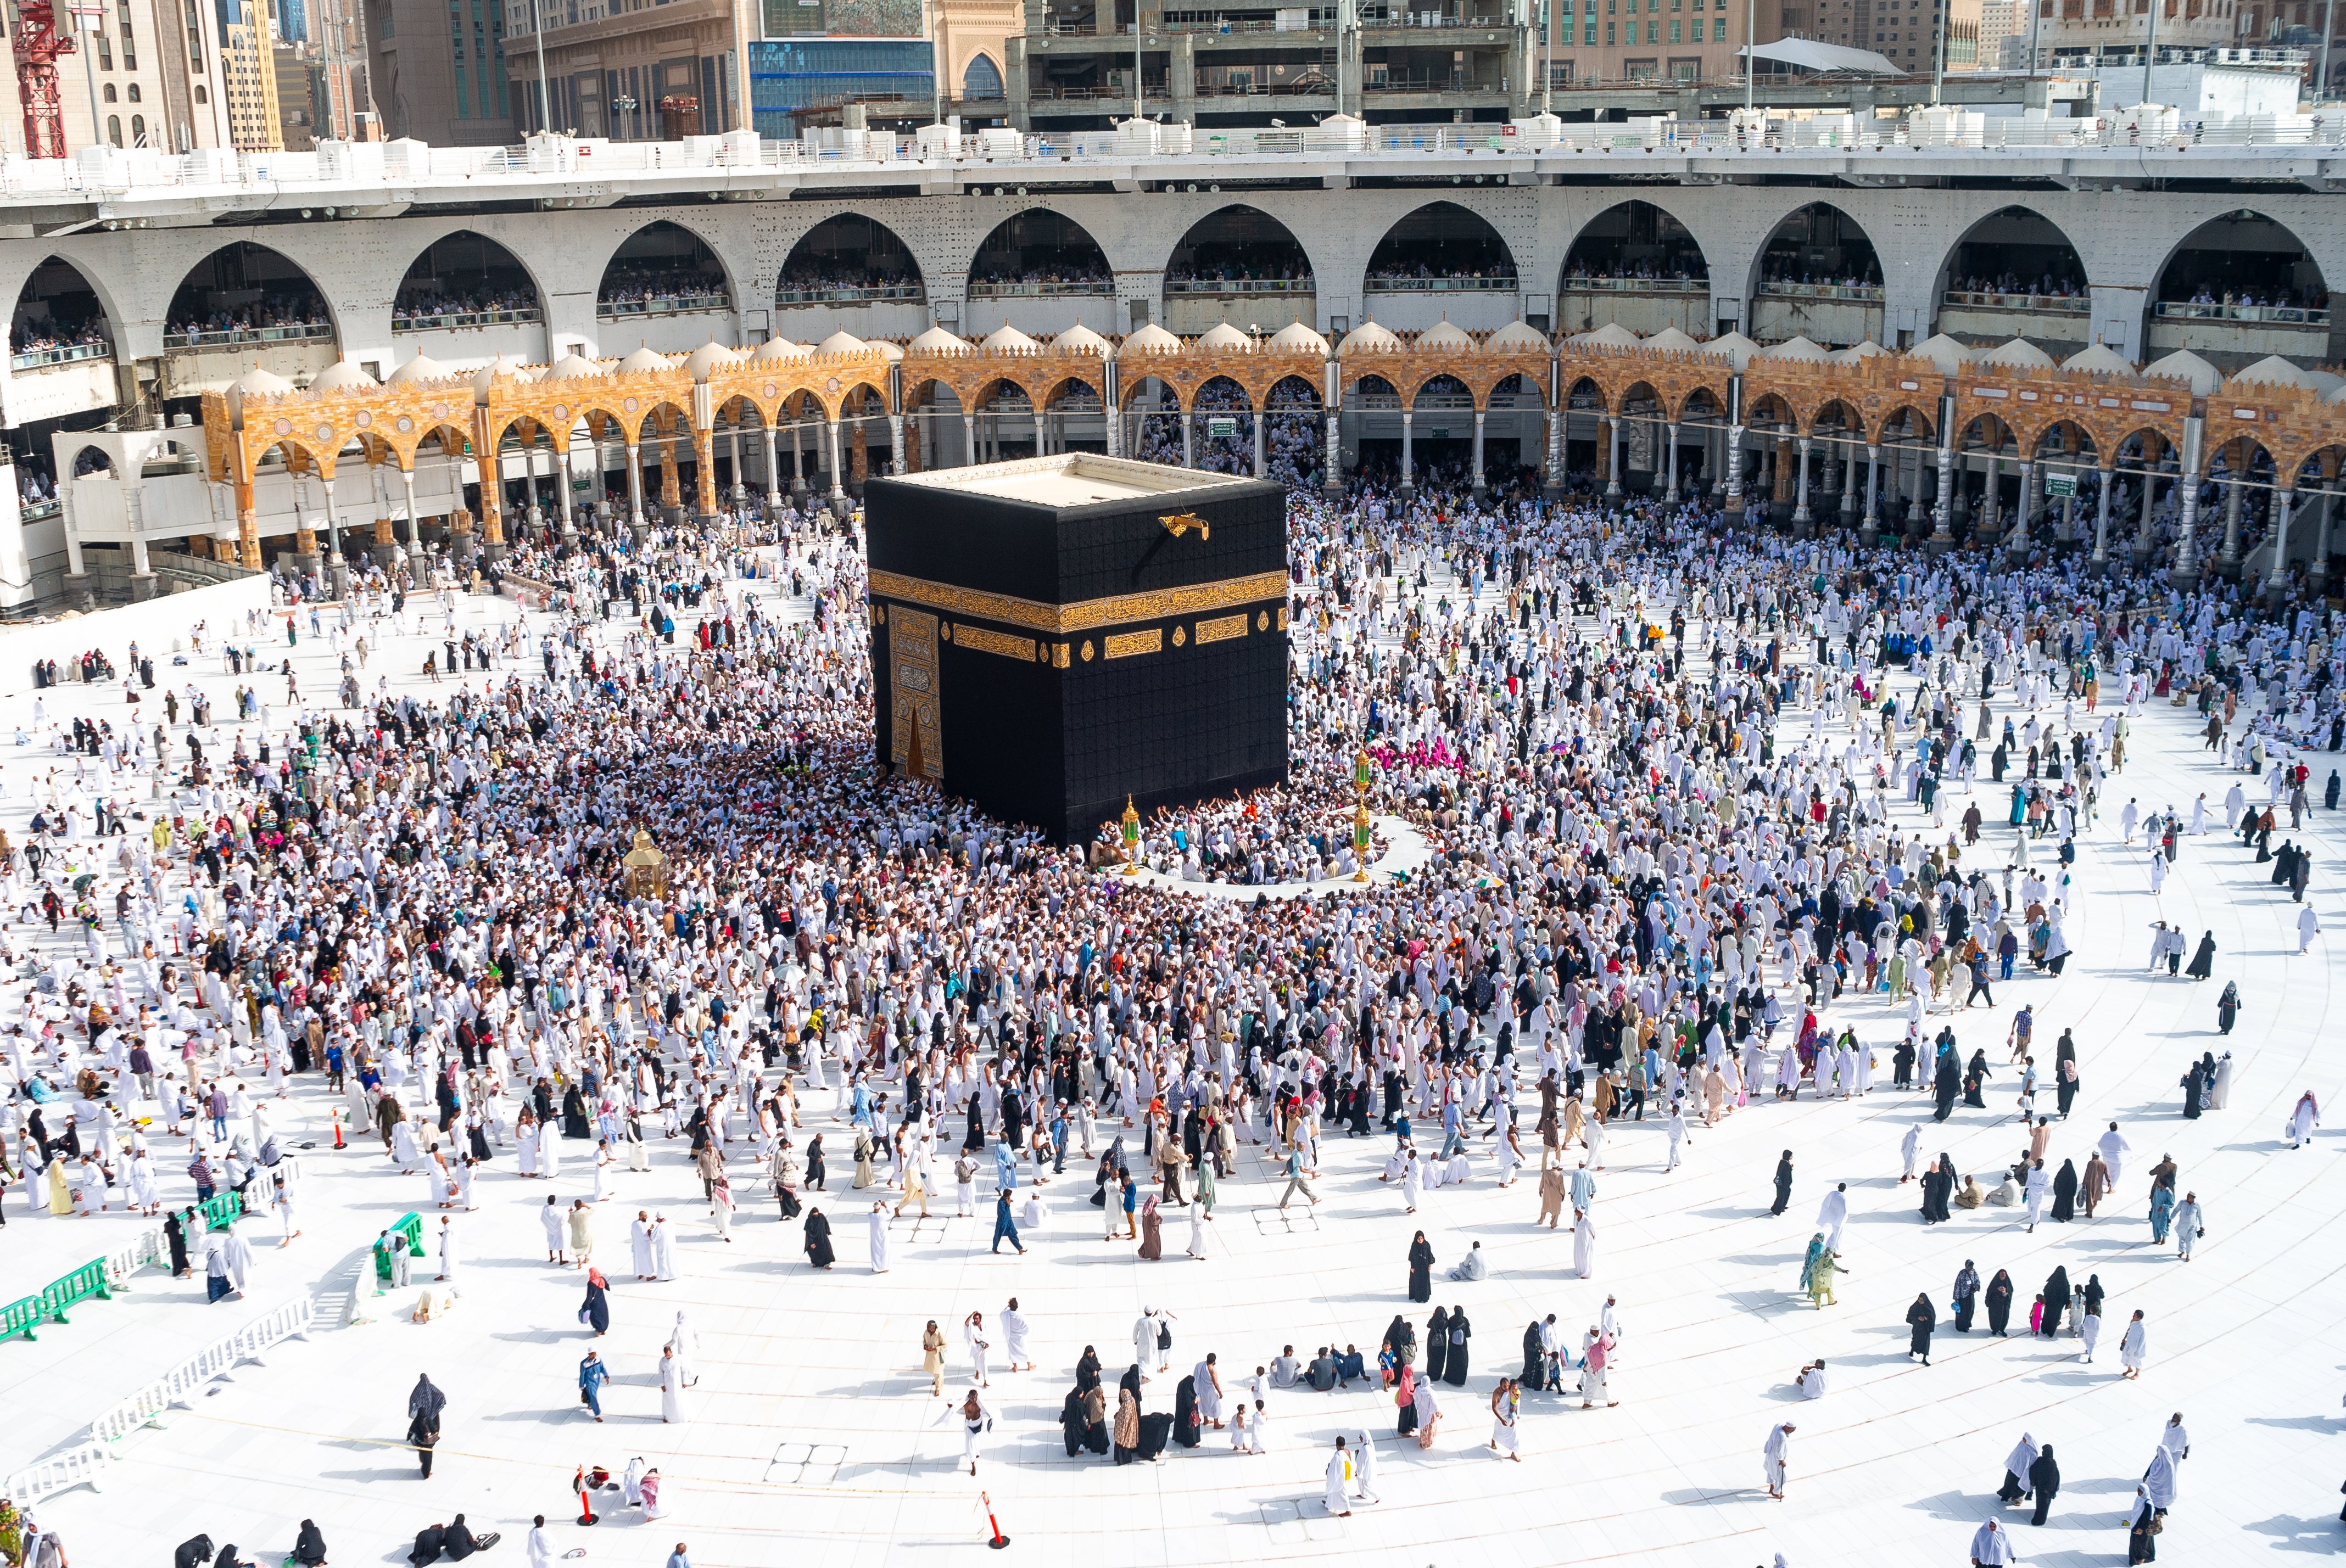 New restrictions mean only a million triple-vaccinated pilgrims will be allowed to visit Mecca this year